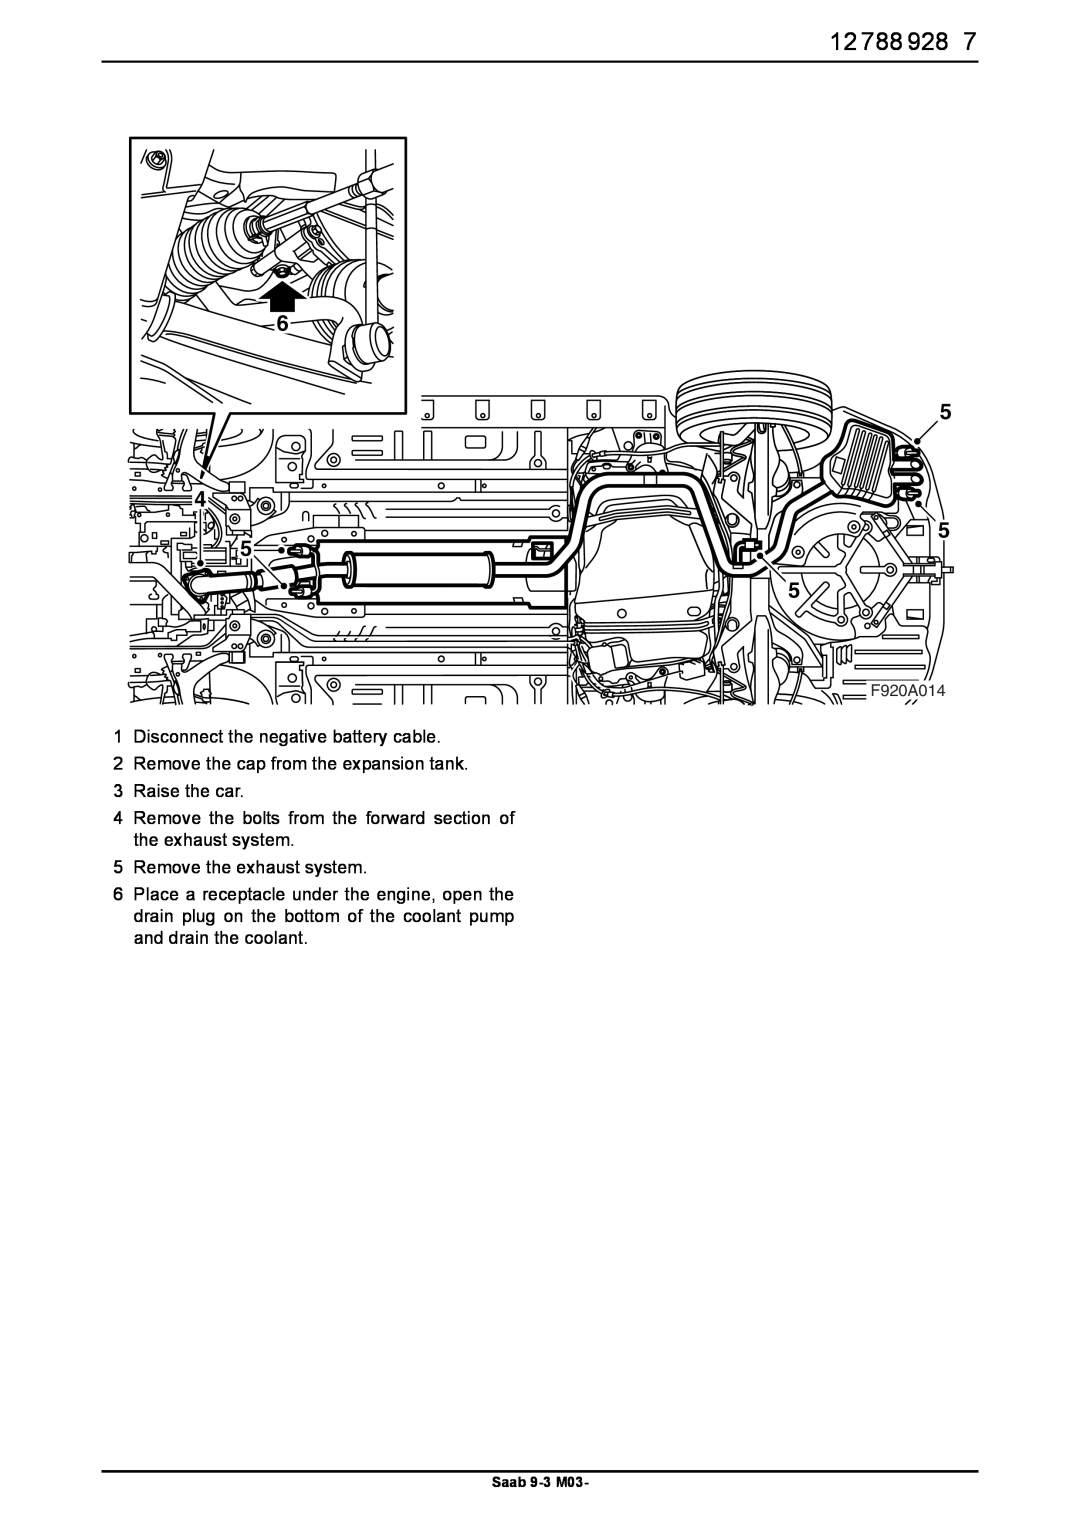 Saab 9-3 M03 1Disconnect the negative battery cable, 2Remove the cap from the expansion tank, 3Raise the car, F920A014 